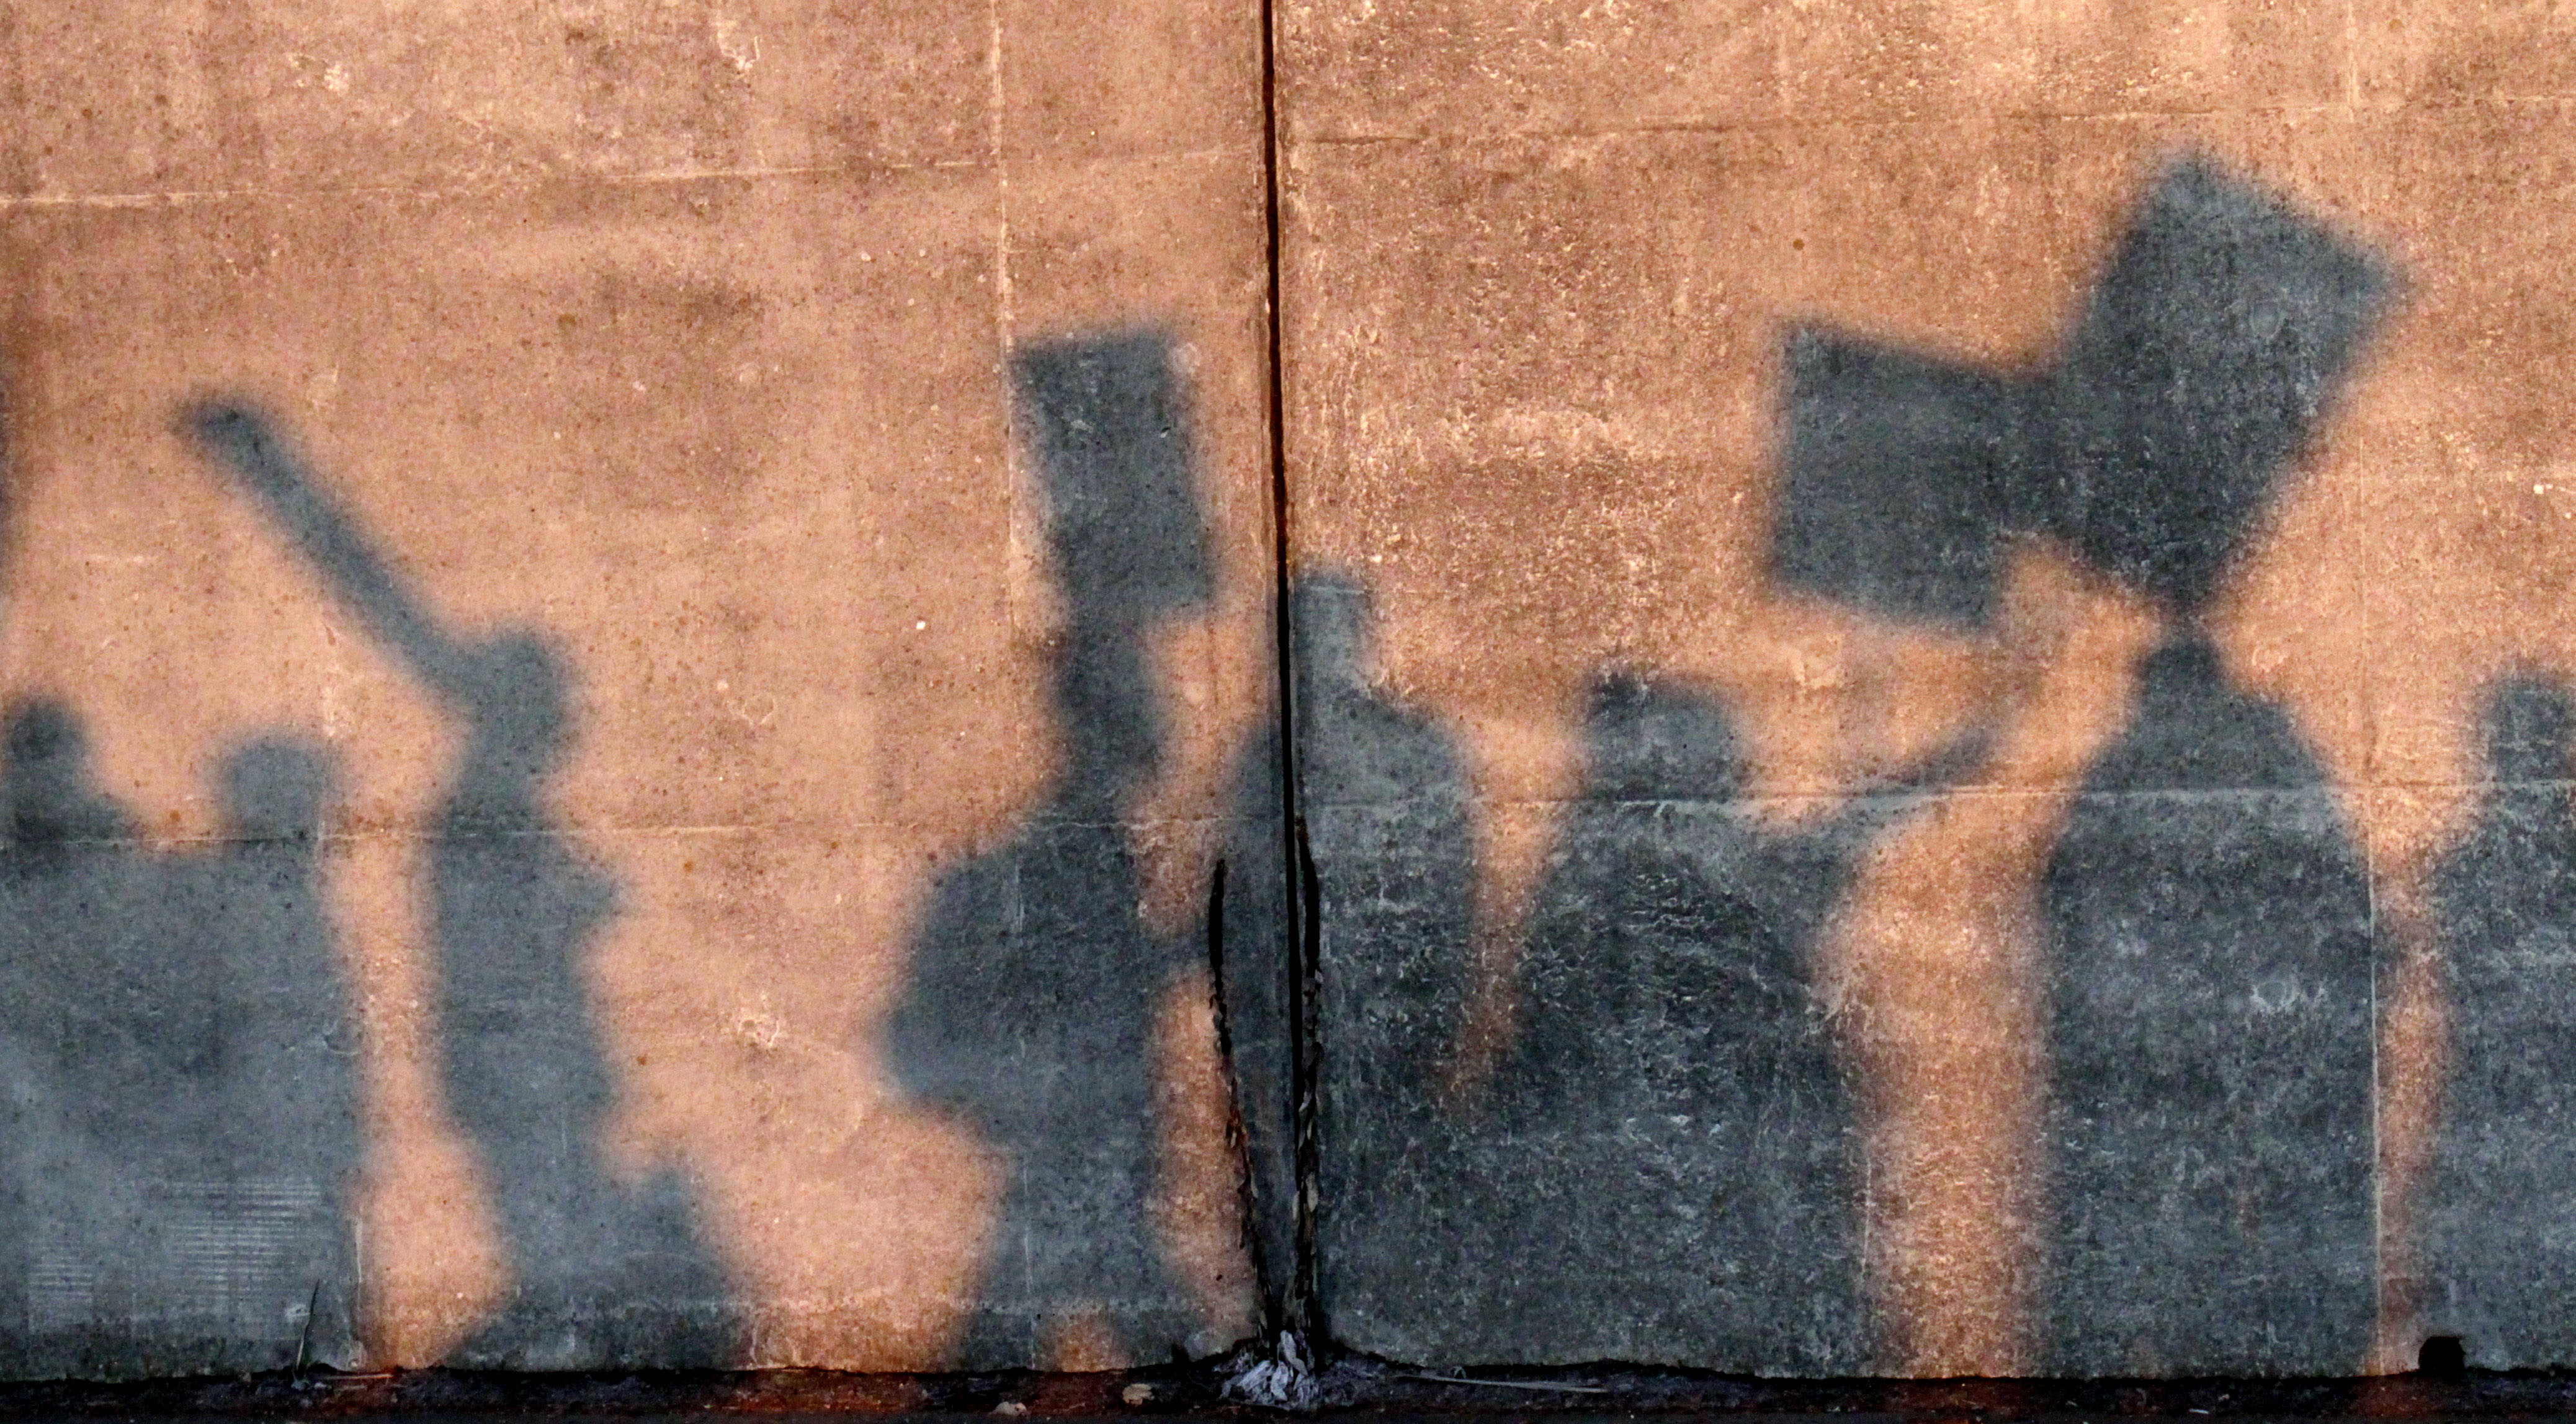 The morning sun casts shadows of protesters as they march in front of an entrance to the Port of Longview in Longview, Wash., Monday, Dec. 12, 2011. Anti-Wall Street protesters along the West Coast joined an effort Monday to blockade some of the nation's busiest docks, with the idea that if they cut off the ports, they cut into corporate profits. (AP Photo/Don Ryan)